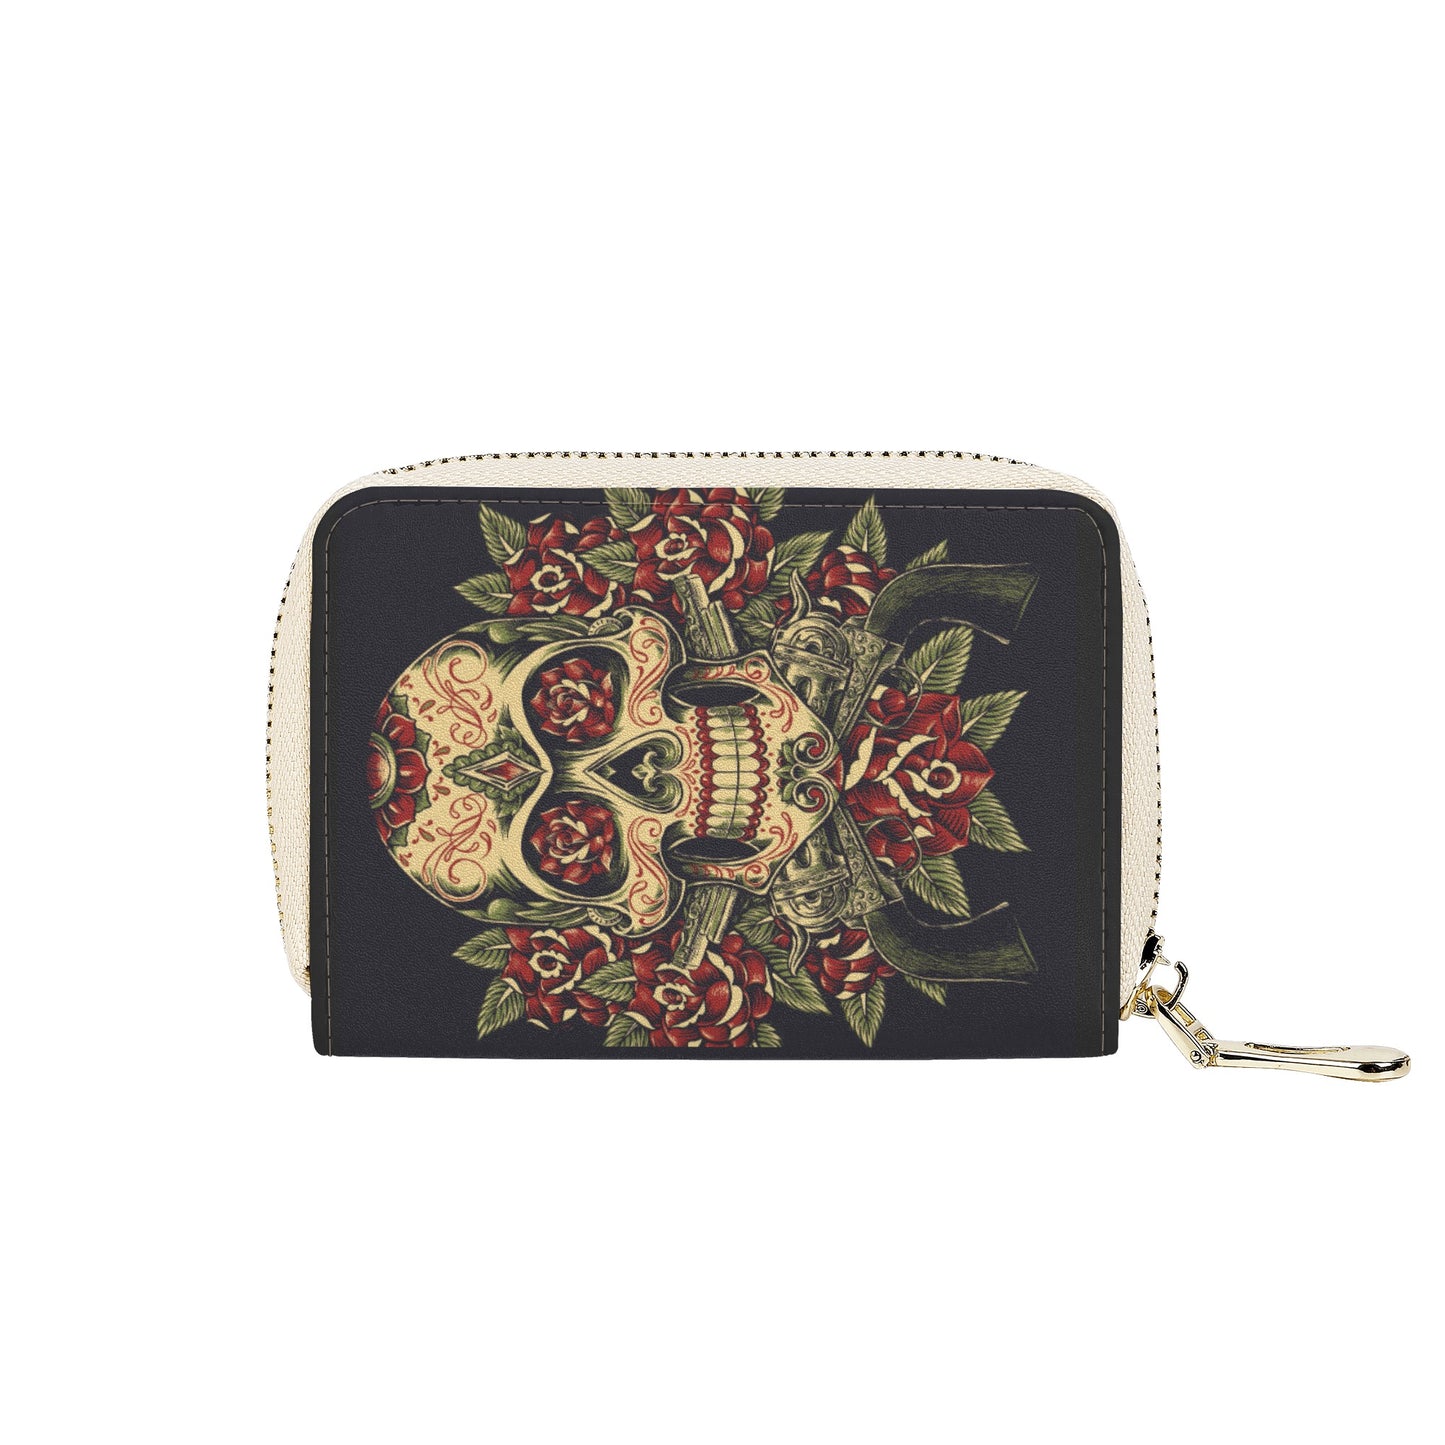 Day of the dead Zipper Card Holder